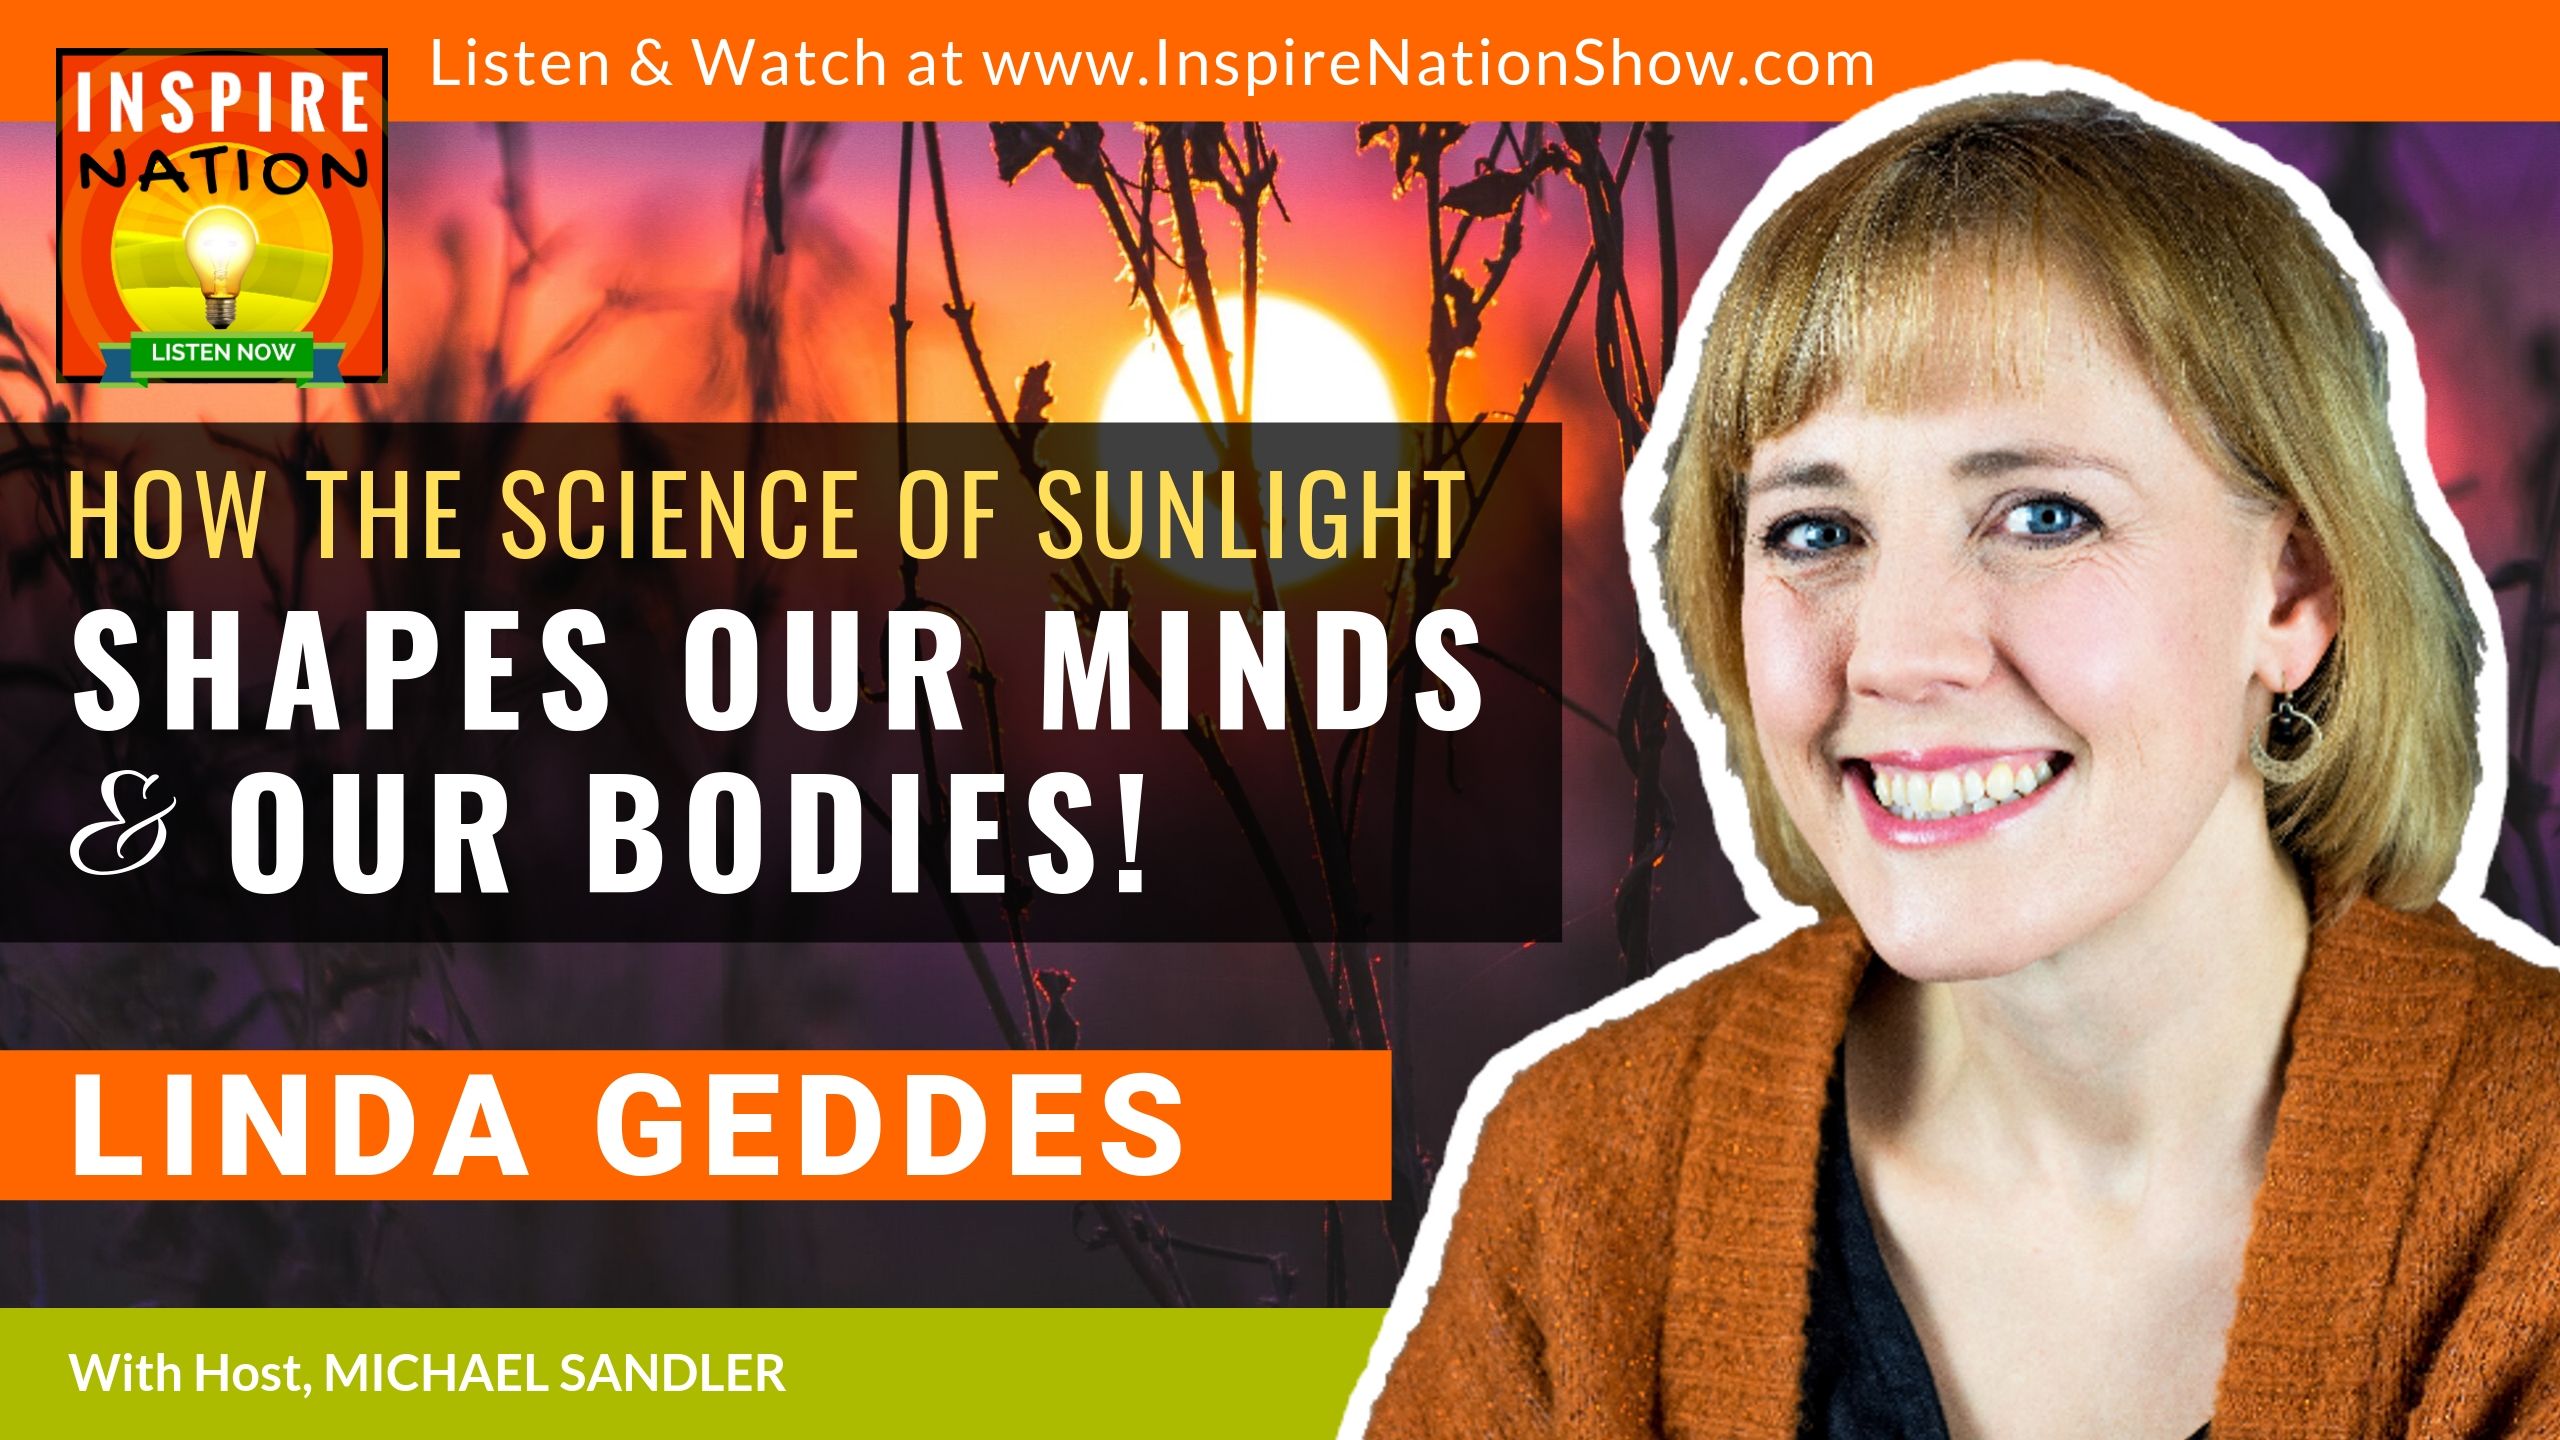 Michael Sandler interviews Linda Geddes on the science of how sunlight affects us!